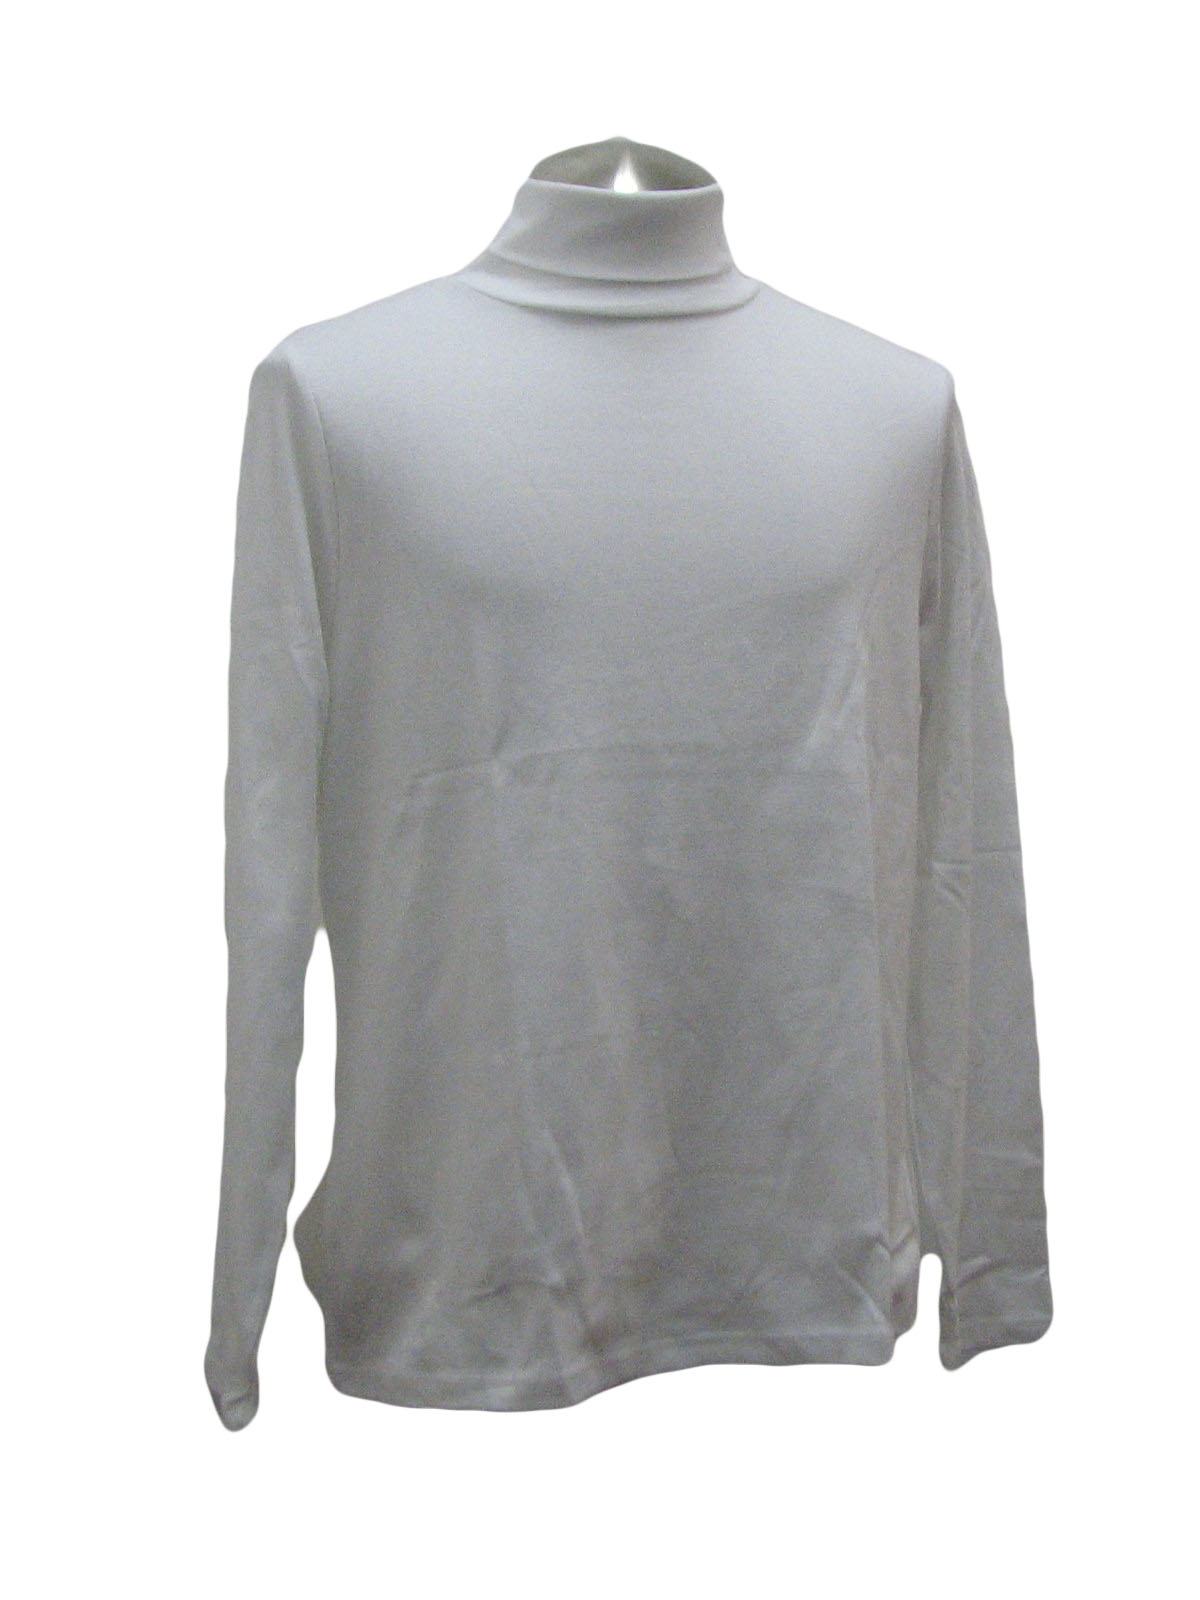 Accessories - White Turtleneck Shirt to wear with your Ugly Christmas ...